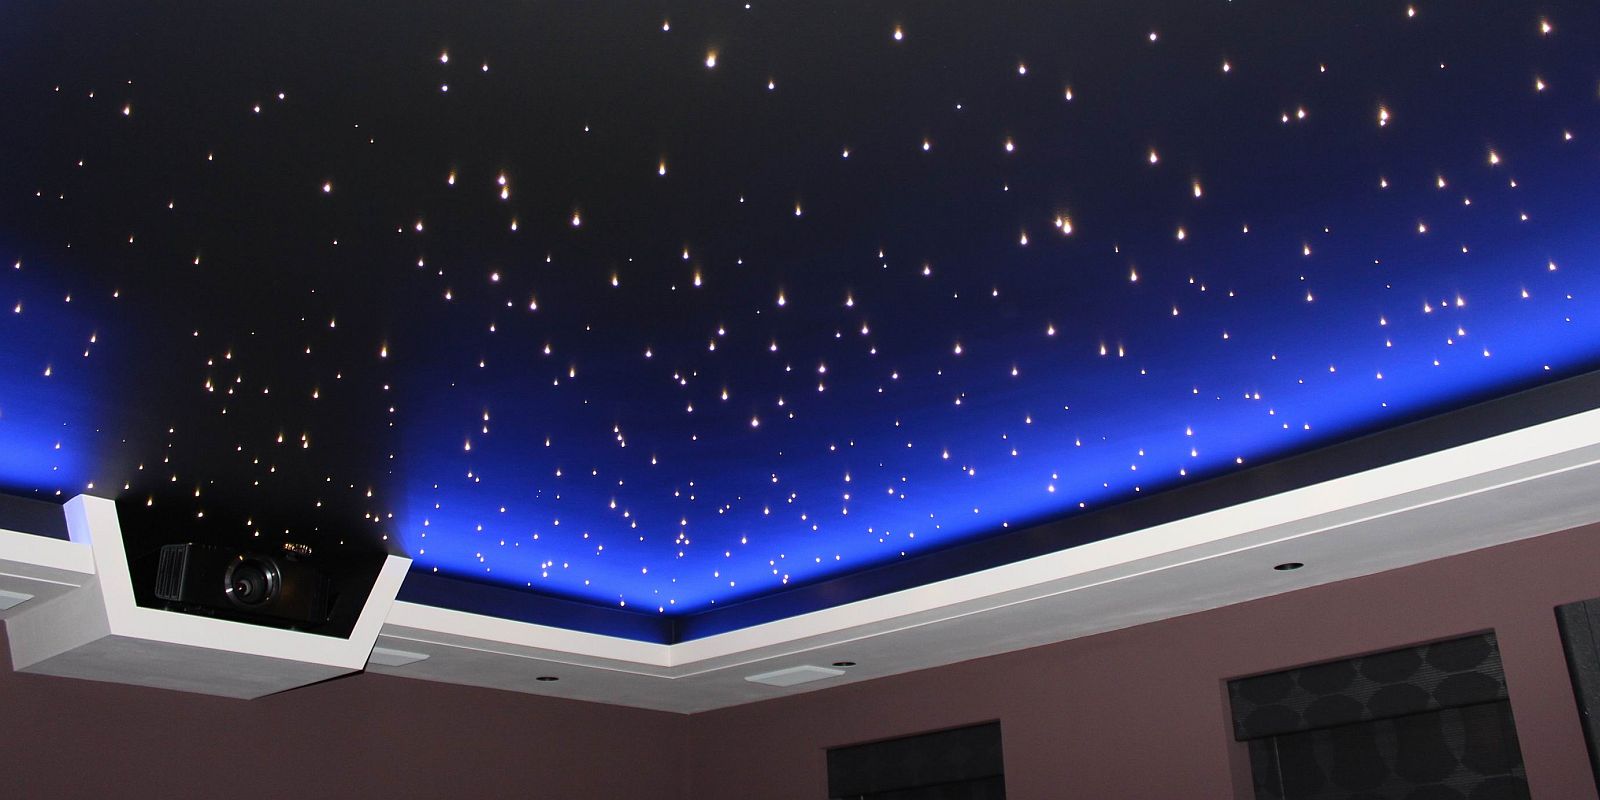 How To Make A Star Ceiling